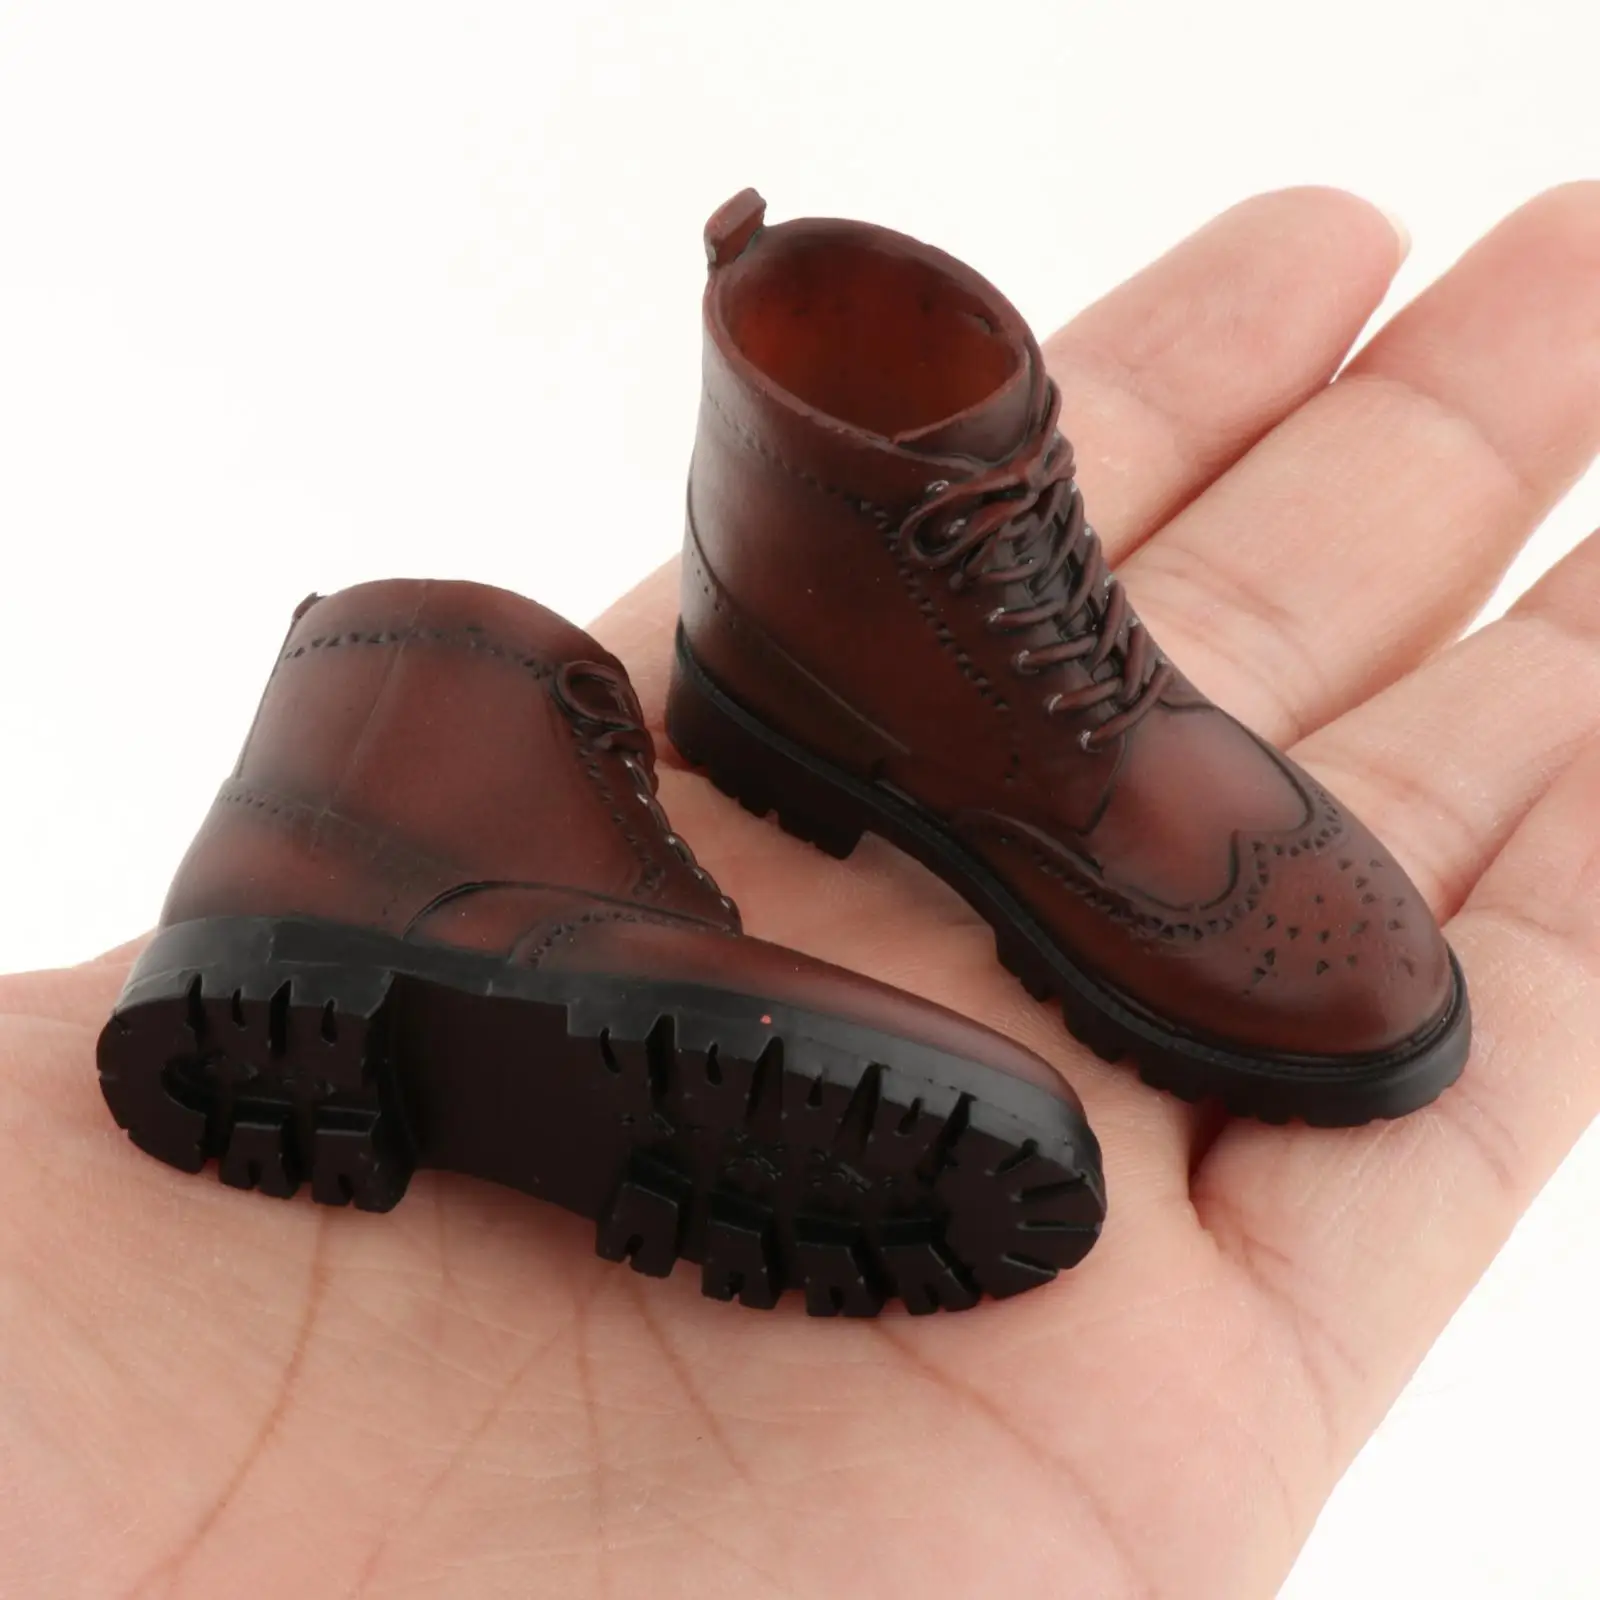 1/6 Soldier Handmade 5.6cm PU Leather Shoes 12 Inch Action Figures Costume Accessory